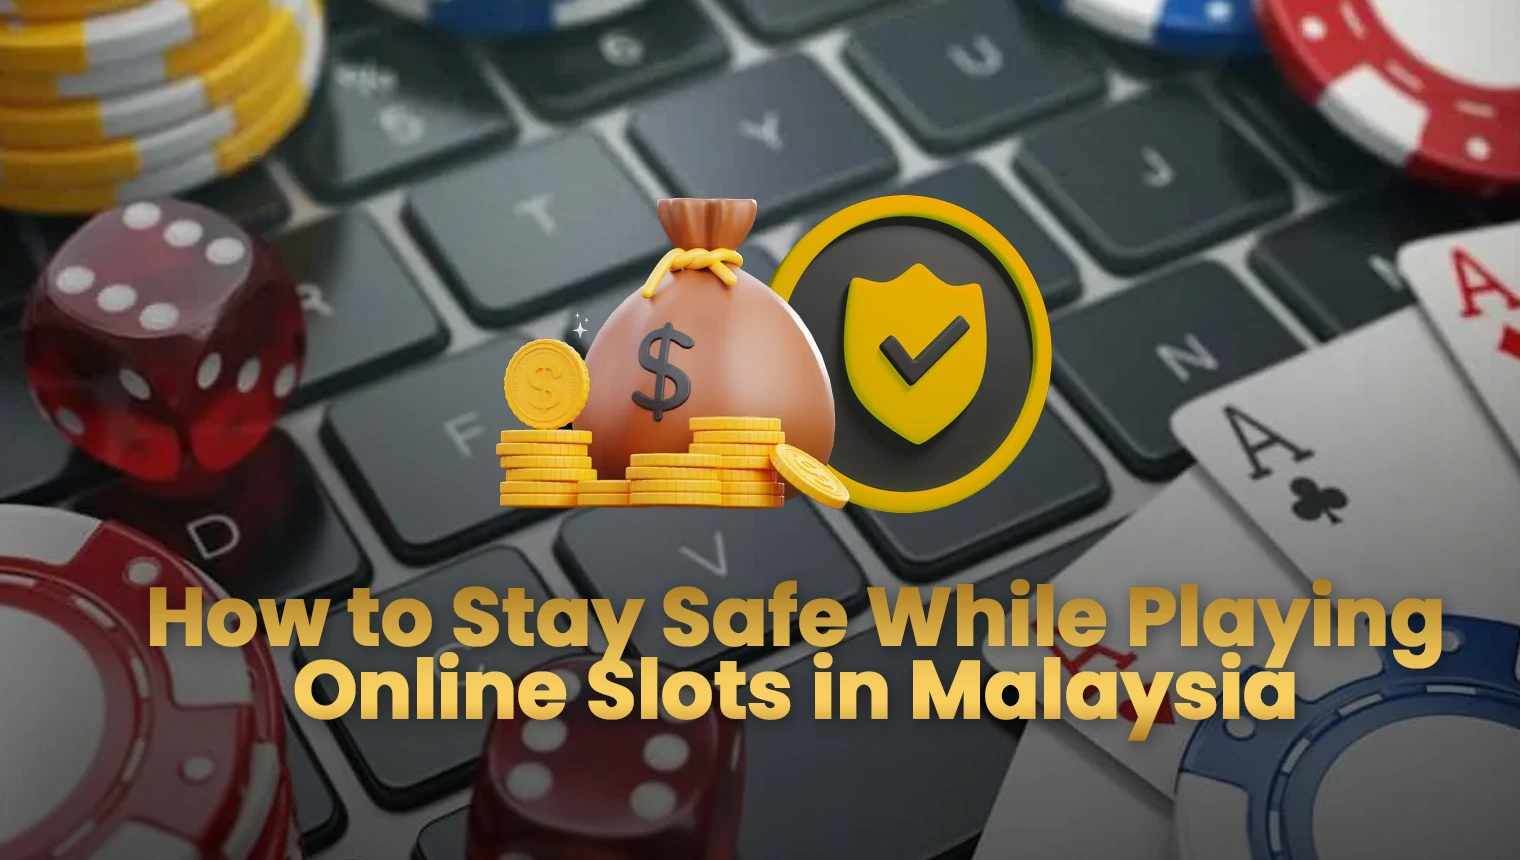 How to Stay Safe While Playing Online Slots in Malaysia